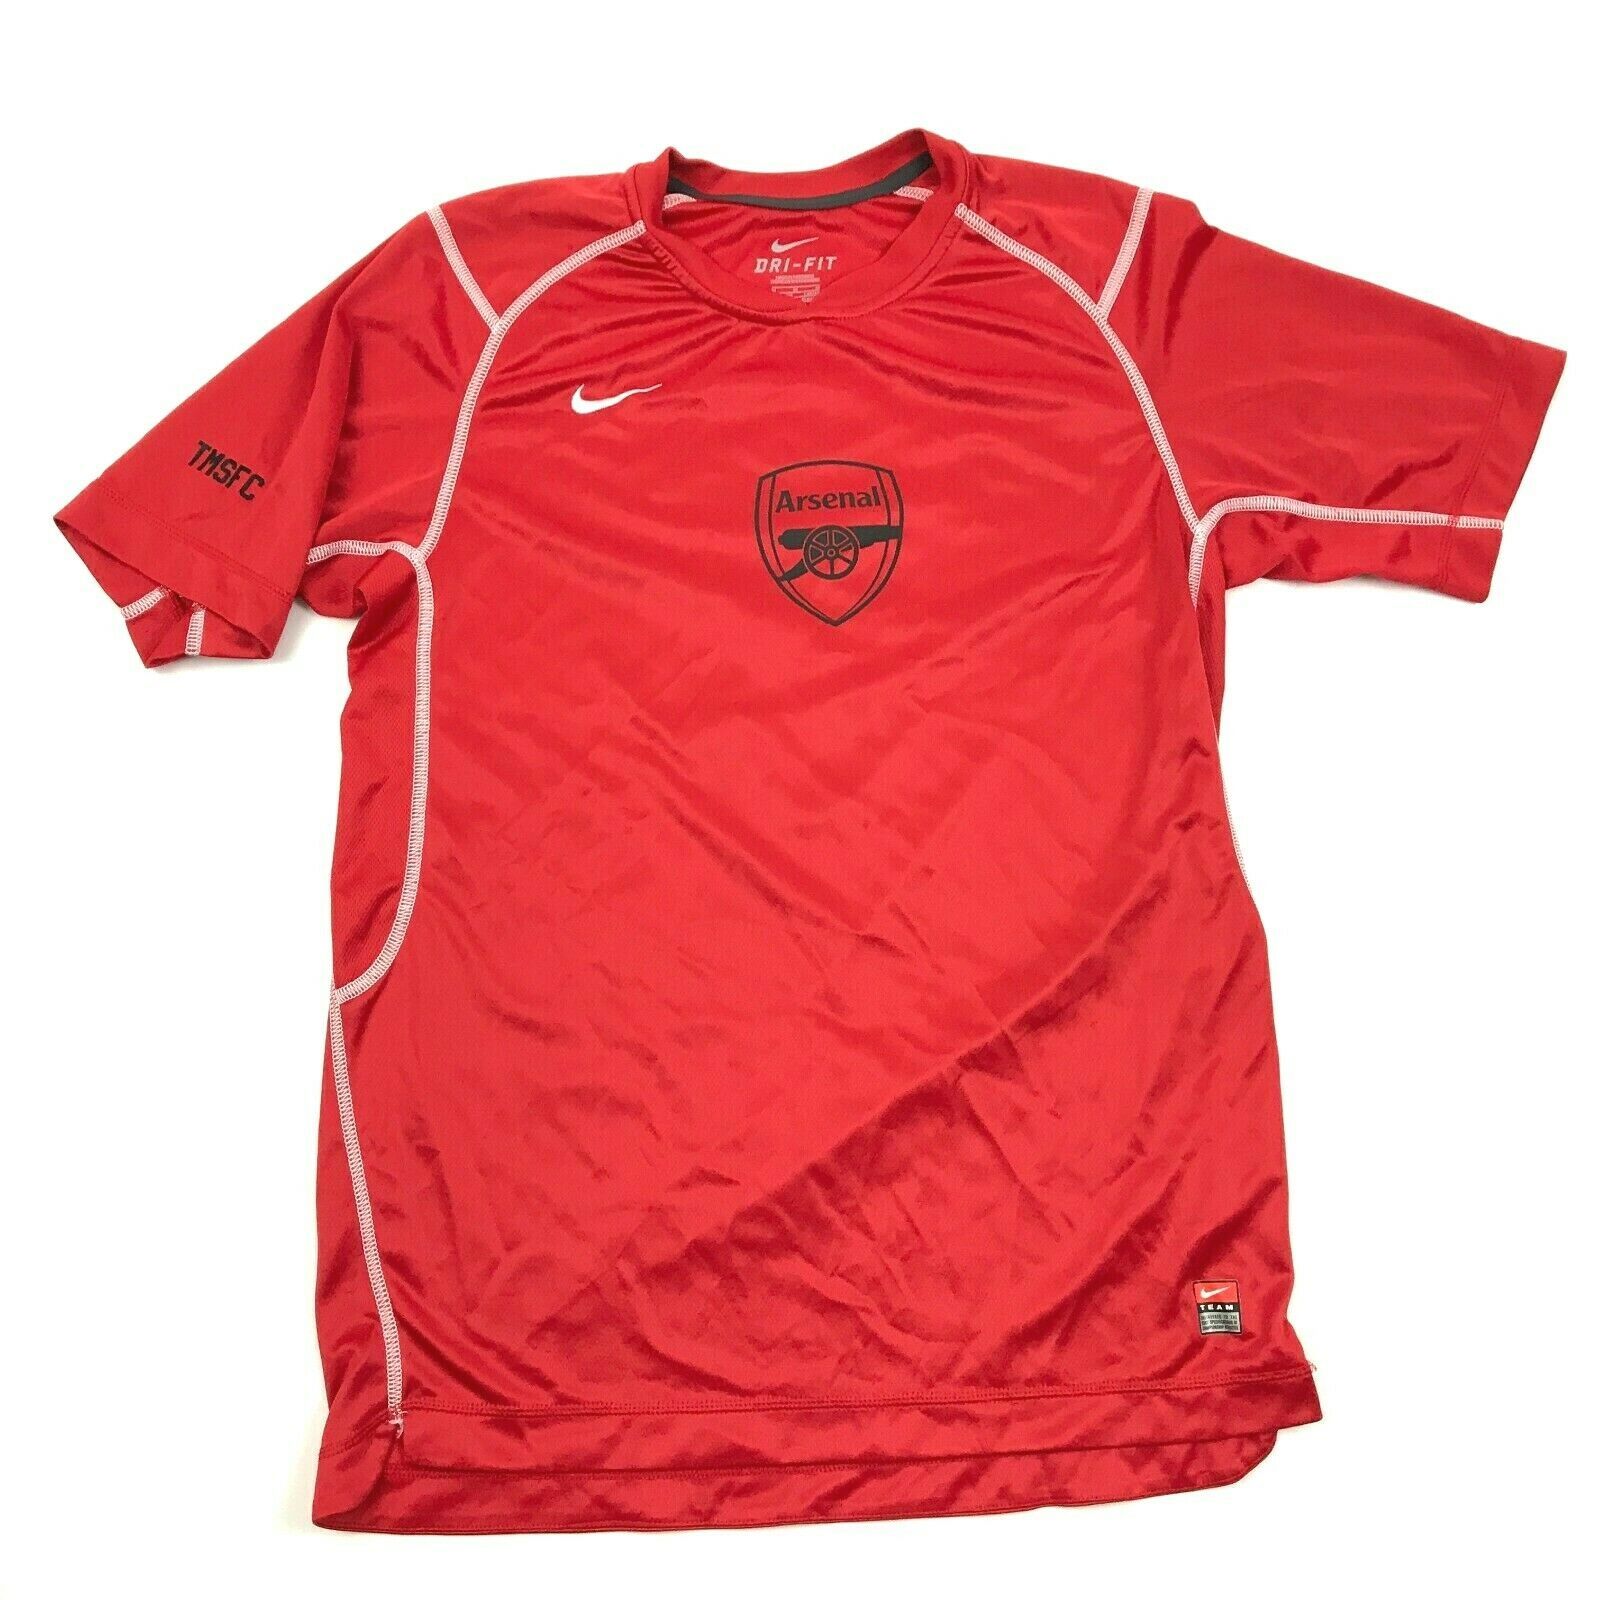 Nike Dri-FIT Mens ARSENAL F.C. Soccer Jersey Red Short Sleeve Size